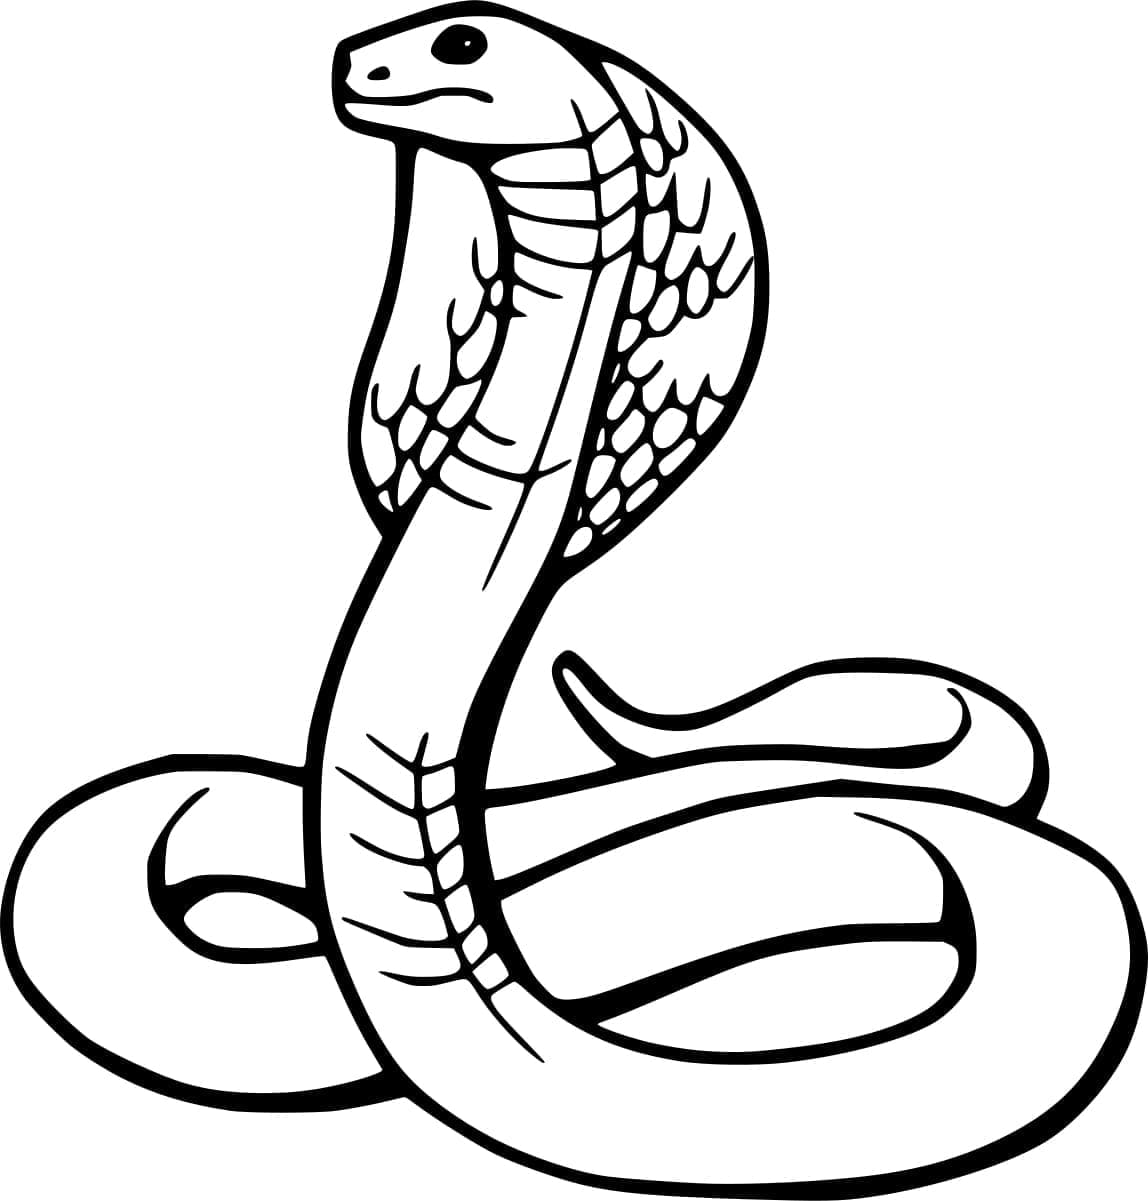 Serpent Cobra coloring page